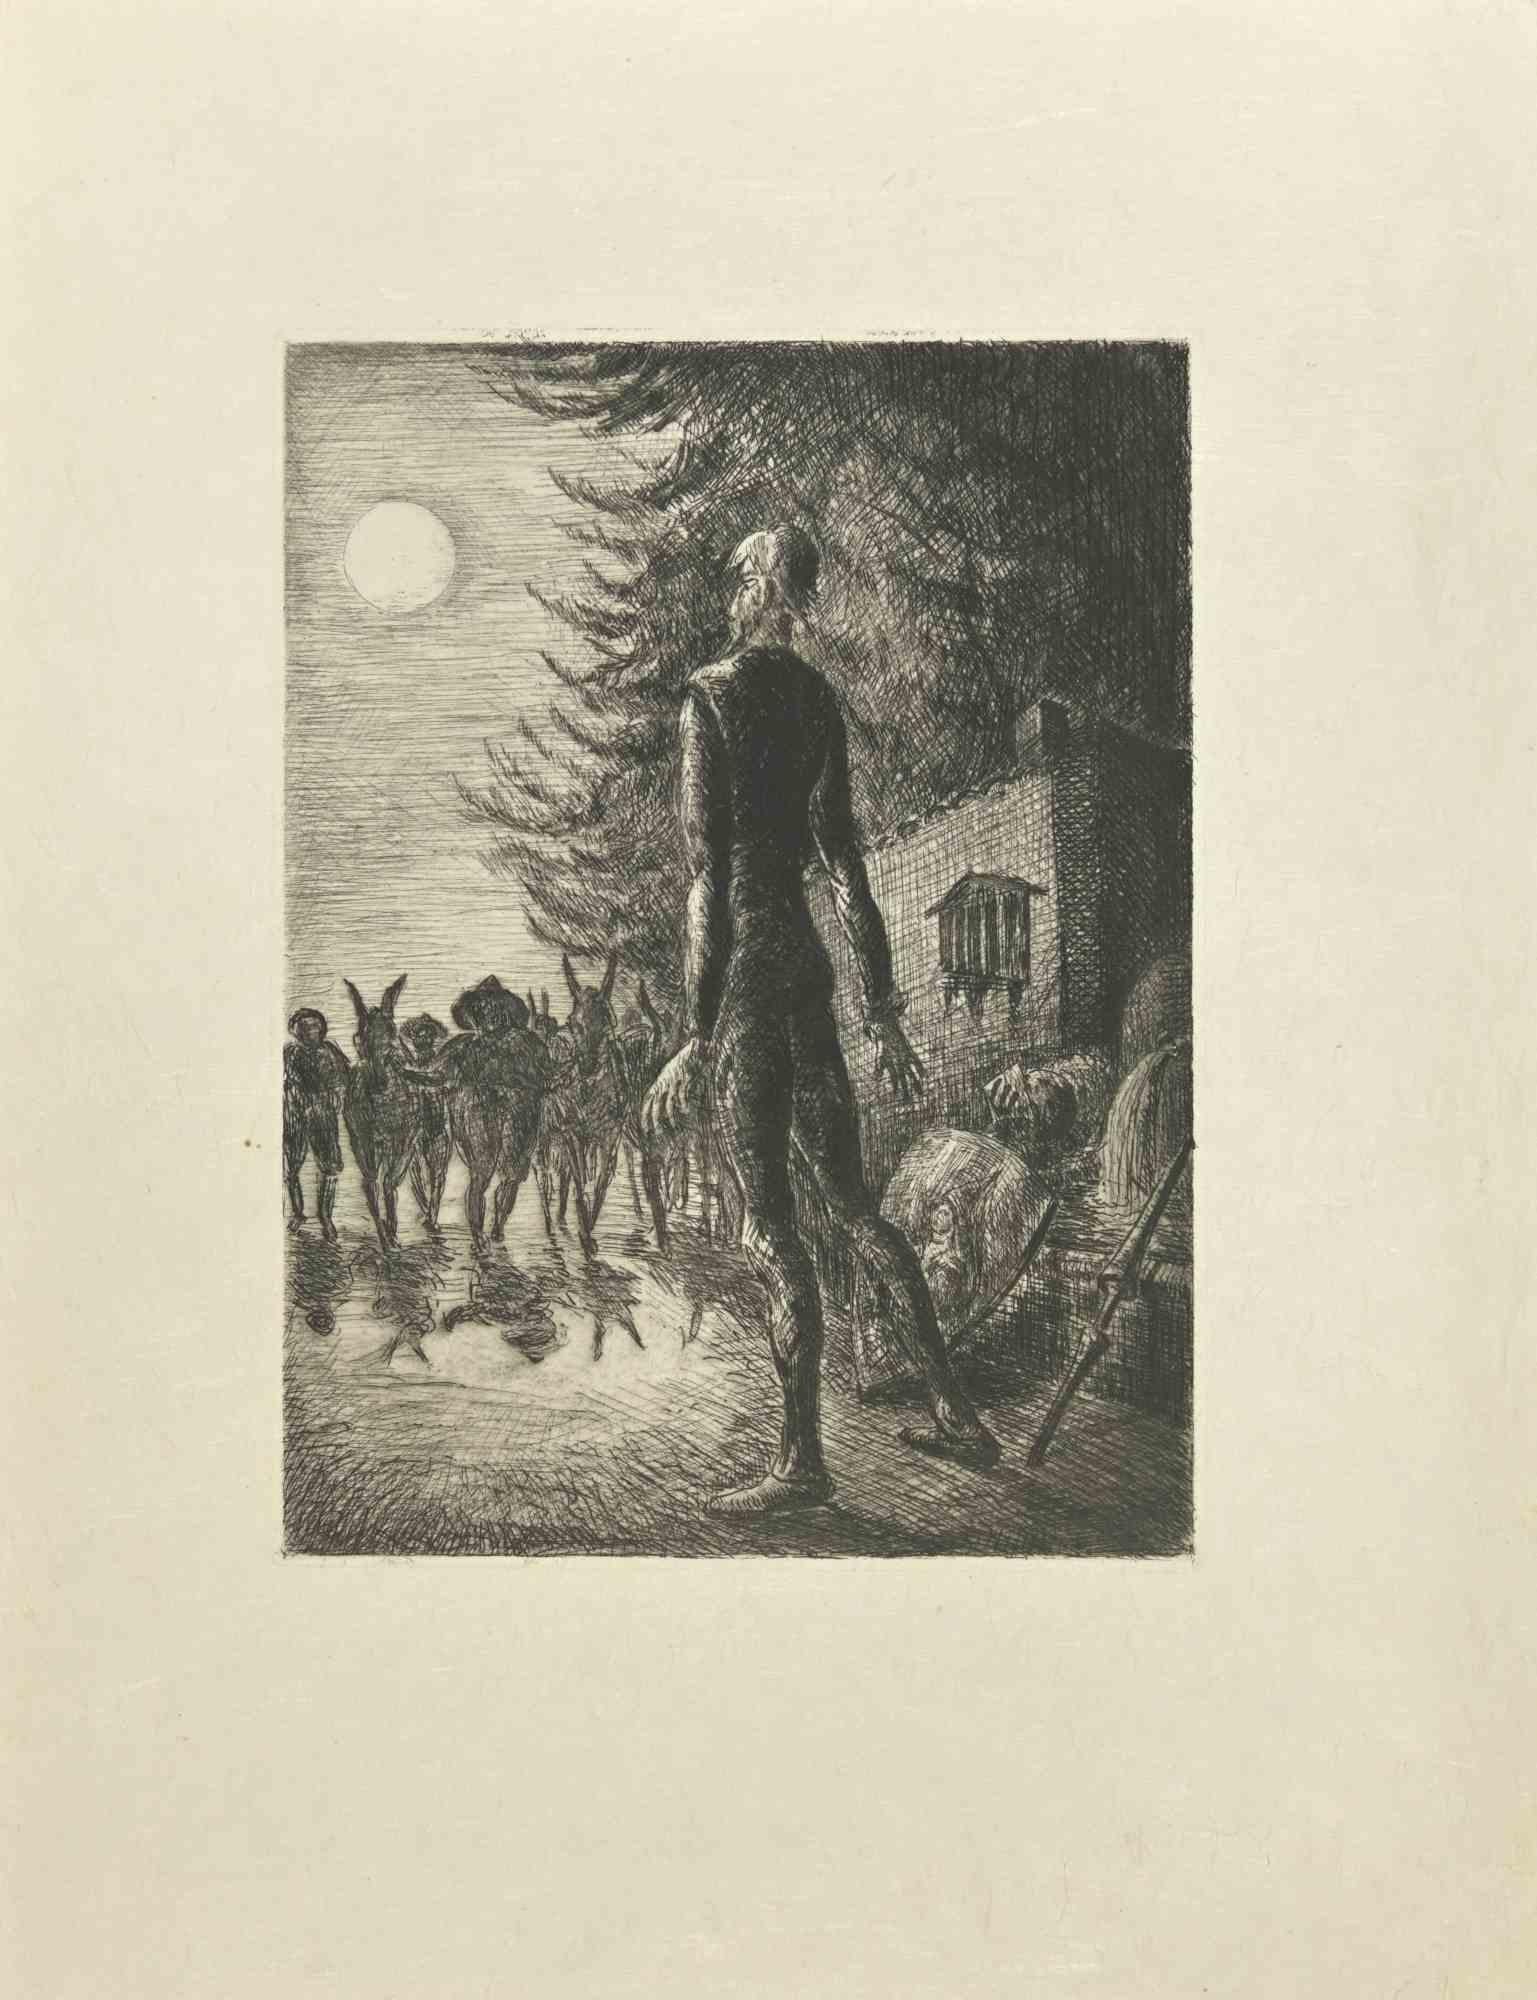 Don Quixote and full-moon is an etching and drypoint print on ivory-colored Japanese paper, realized by Wladyslaw Jahl in 1951.

It belongs to a limited edition of 125 specimens.

Good conditions.

The artwork represents a visual scene from Don